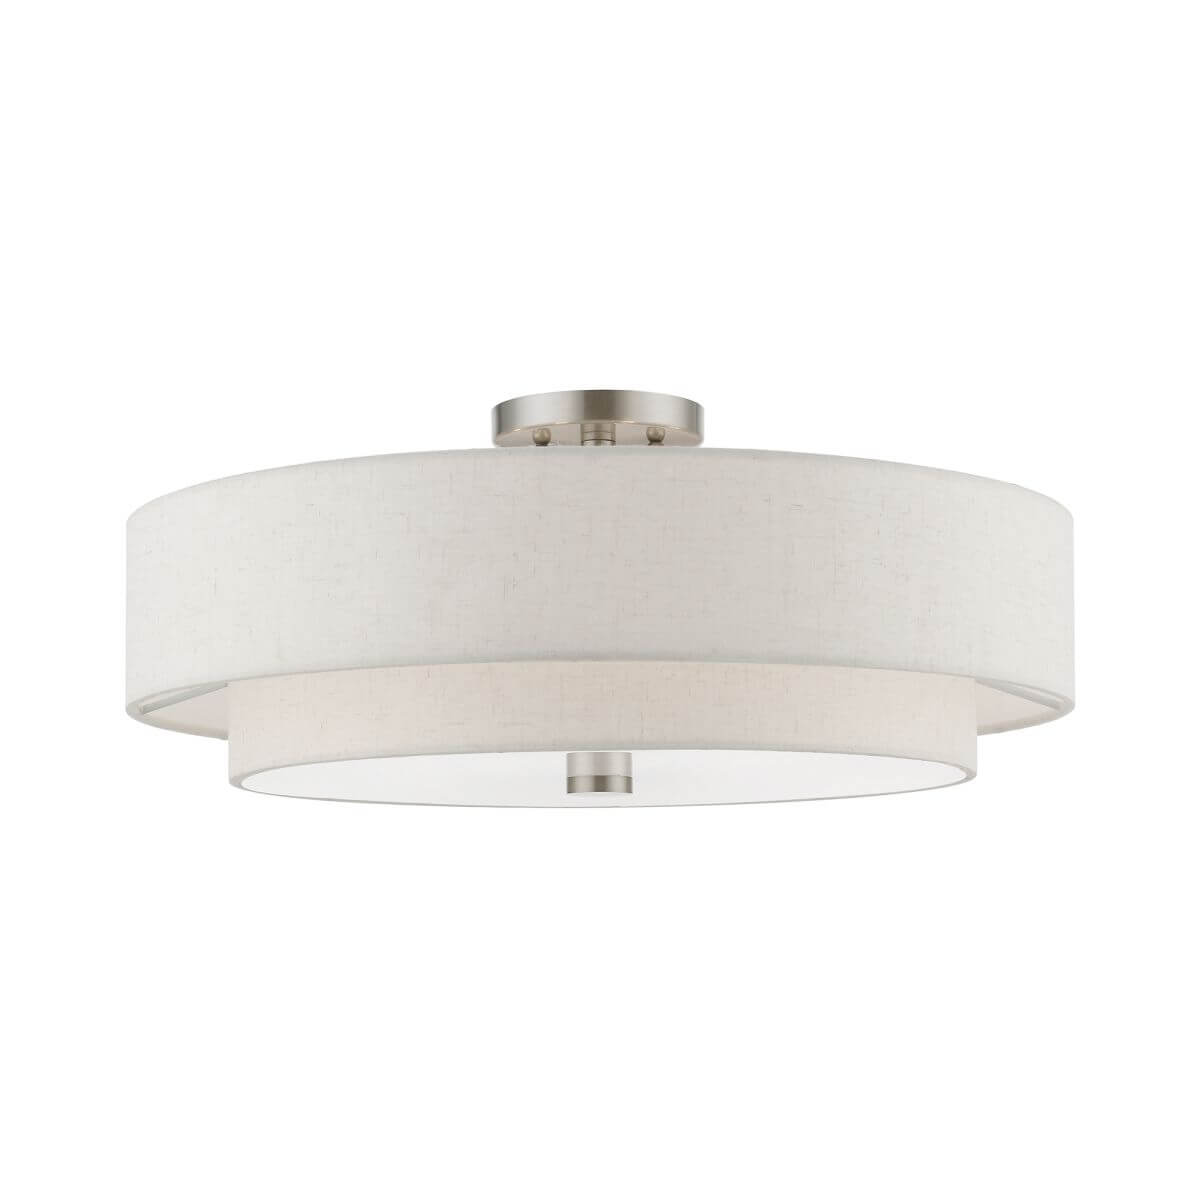 Livex 52139-91 Meridian 5 Light 22 inch Semi-Flush Mount in Brushed Nickel with Hand Crafted Oatmeal Color Hardback Fabric Shade - White Fabric Inside